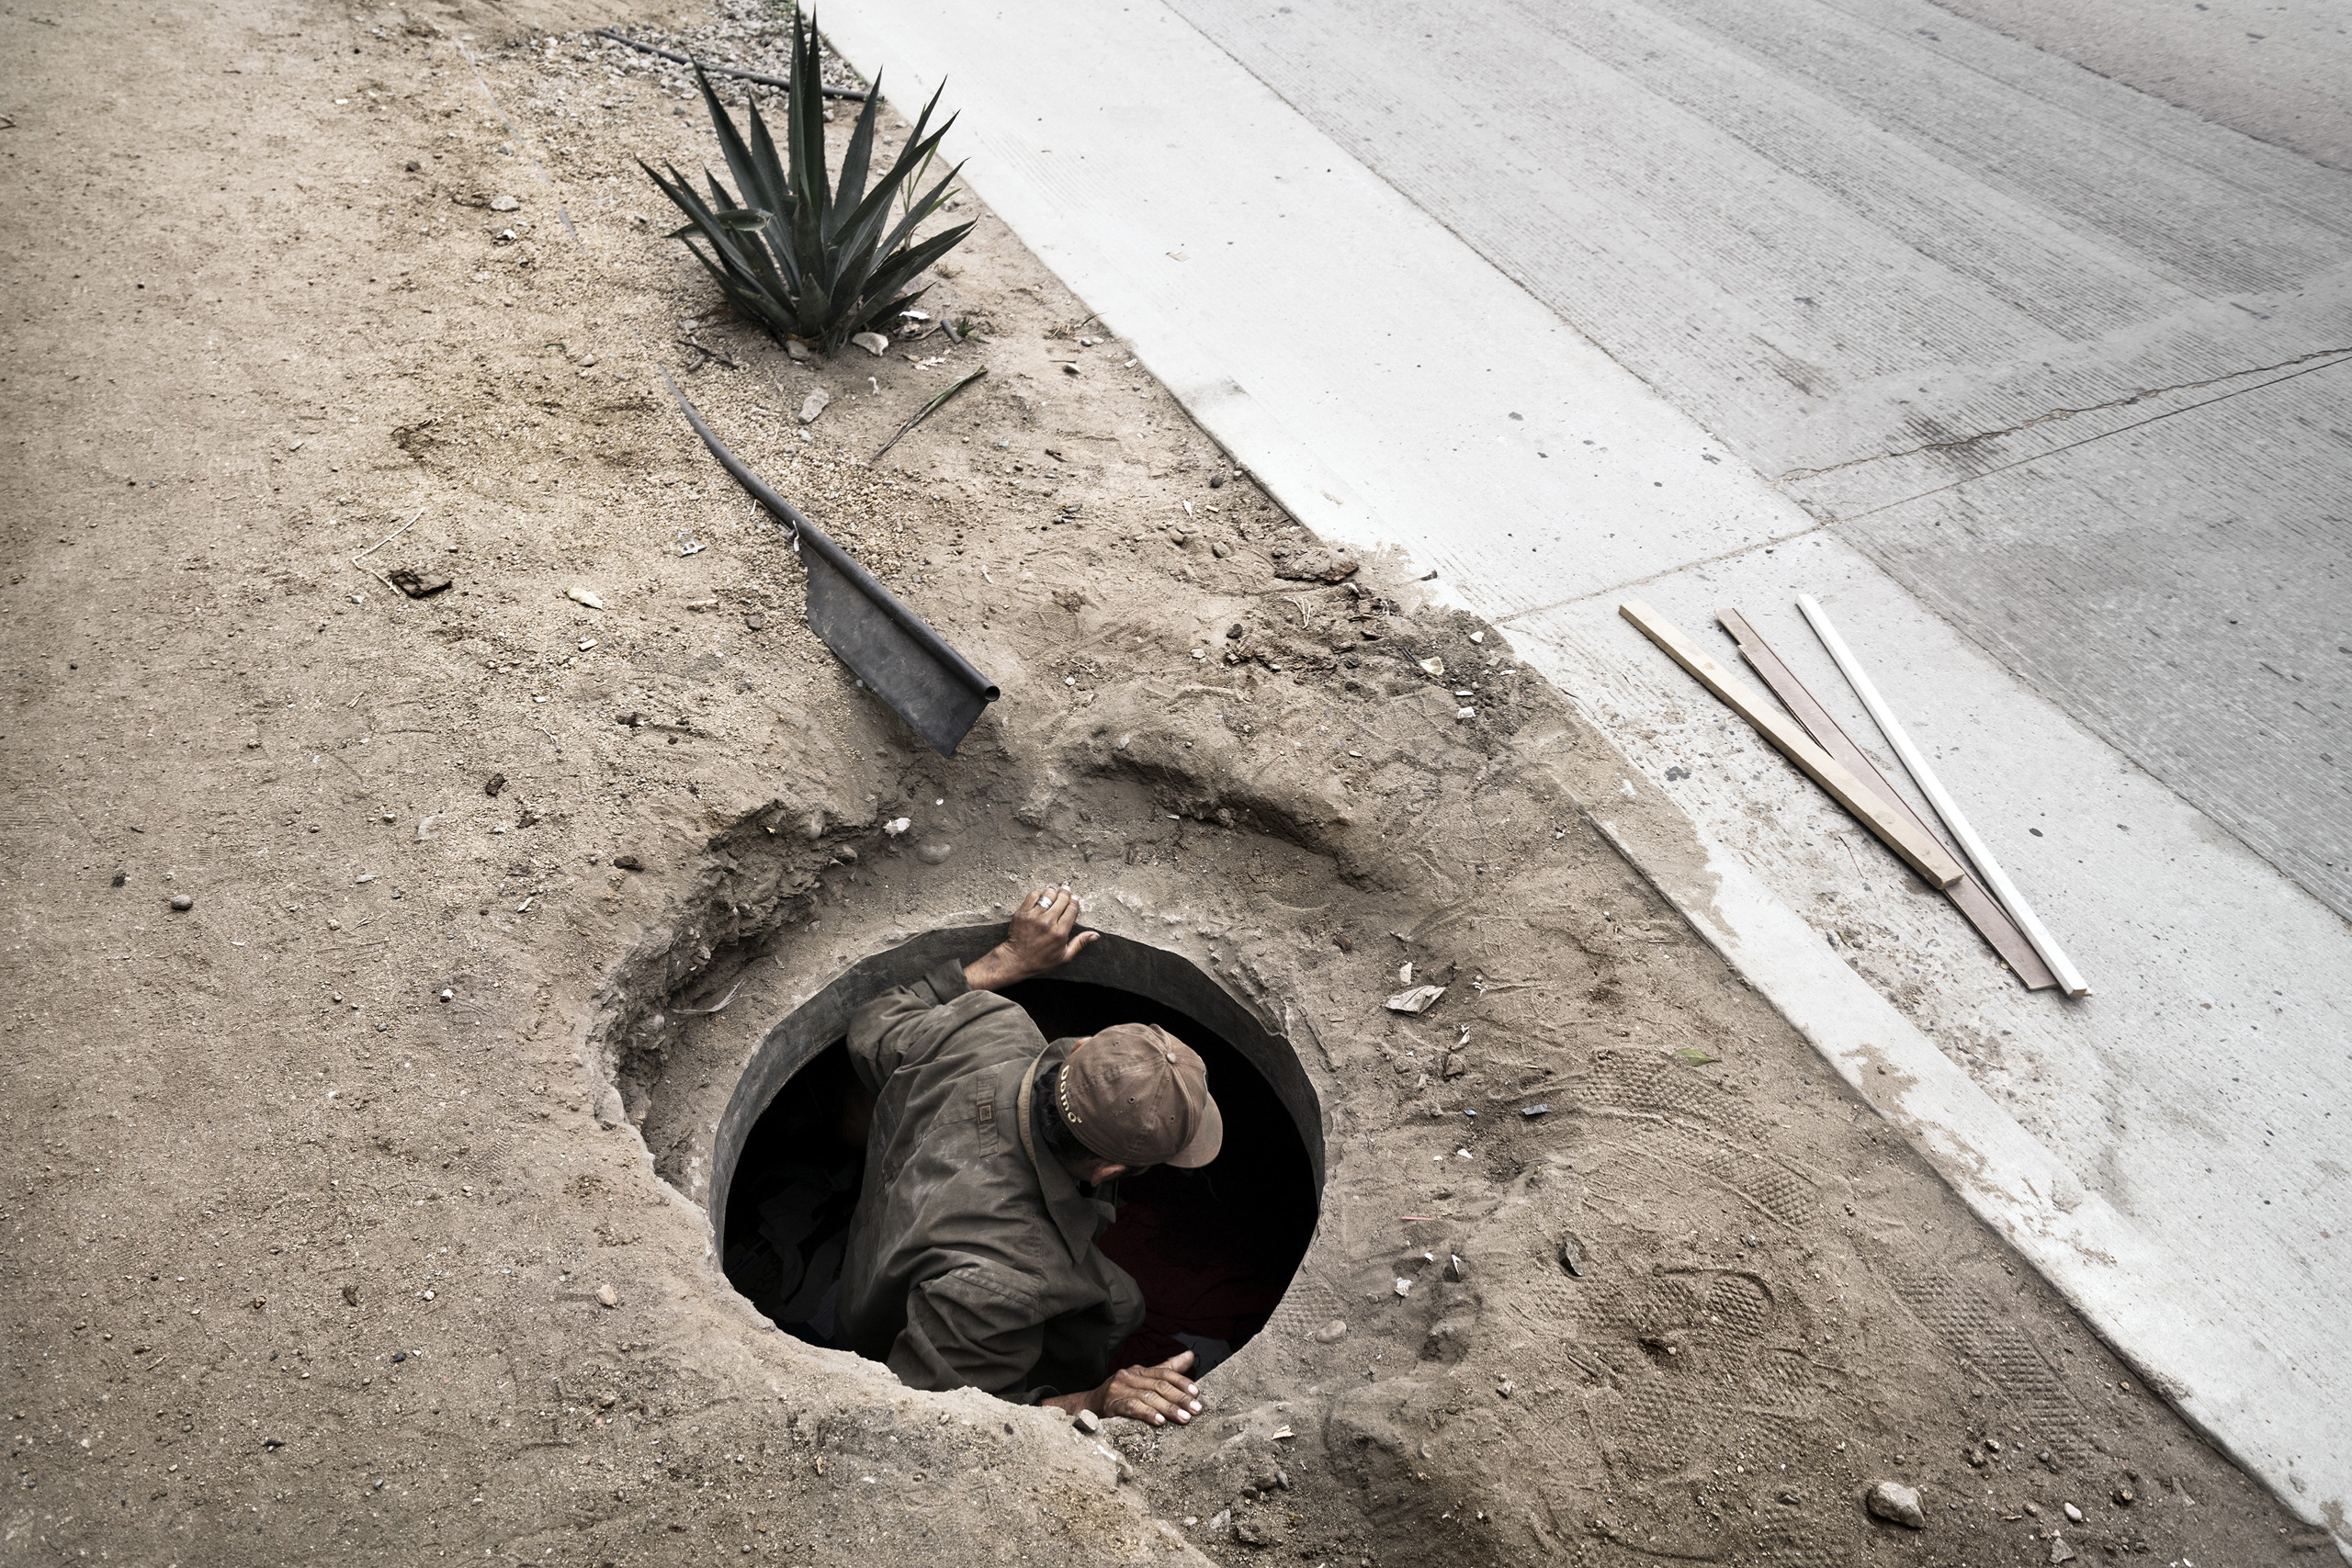 An illegal Central American migrant comes out of a manhole where he lives, along the road that flanks the border between Mexico and the U.S. He is waiting for the right moment to cross the border.Tijuana, Baja California, Mexico. Oct. 12, 2016.